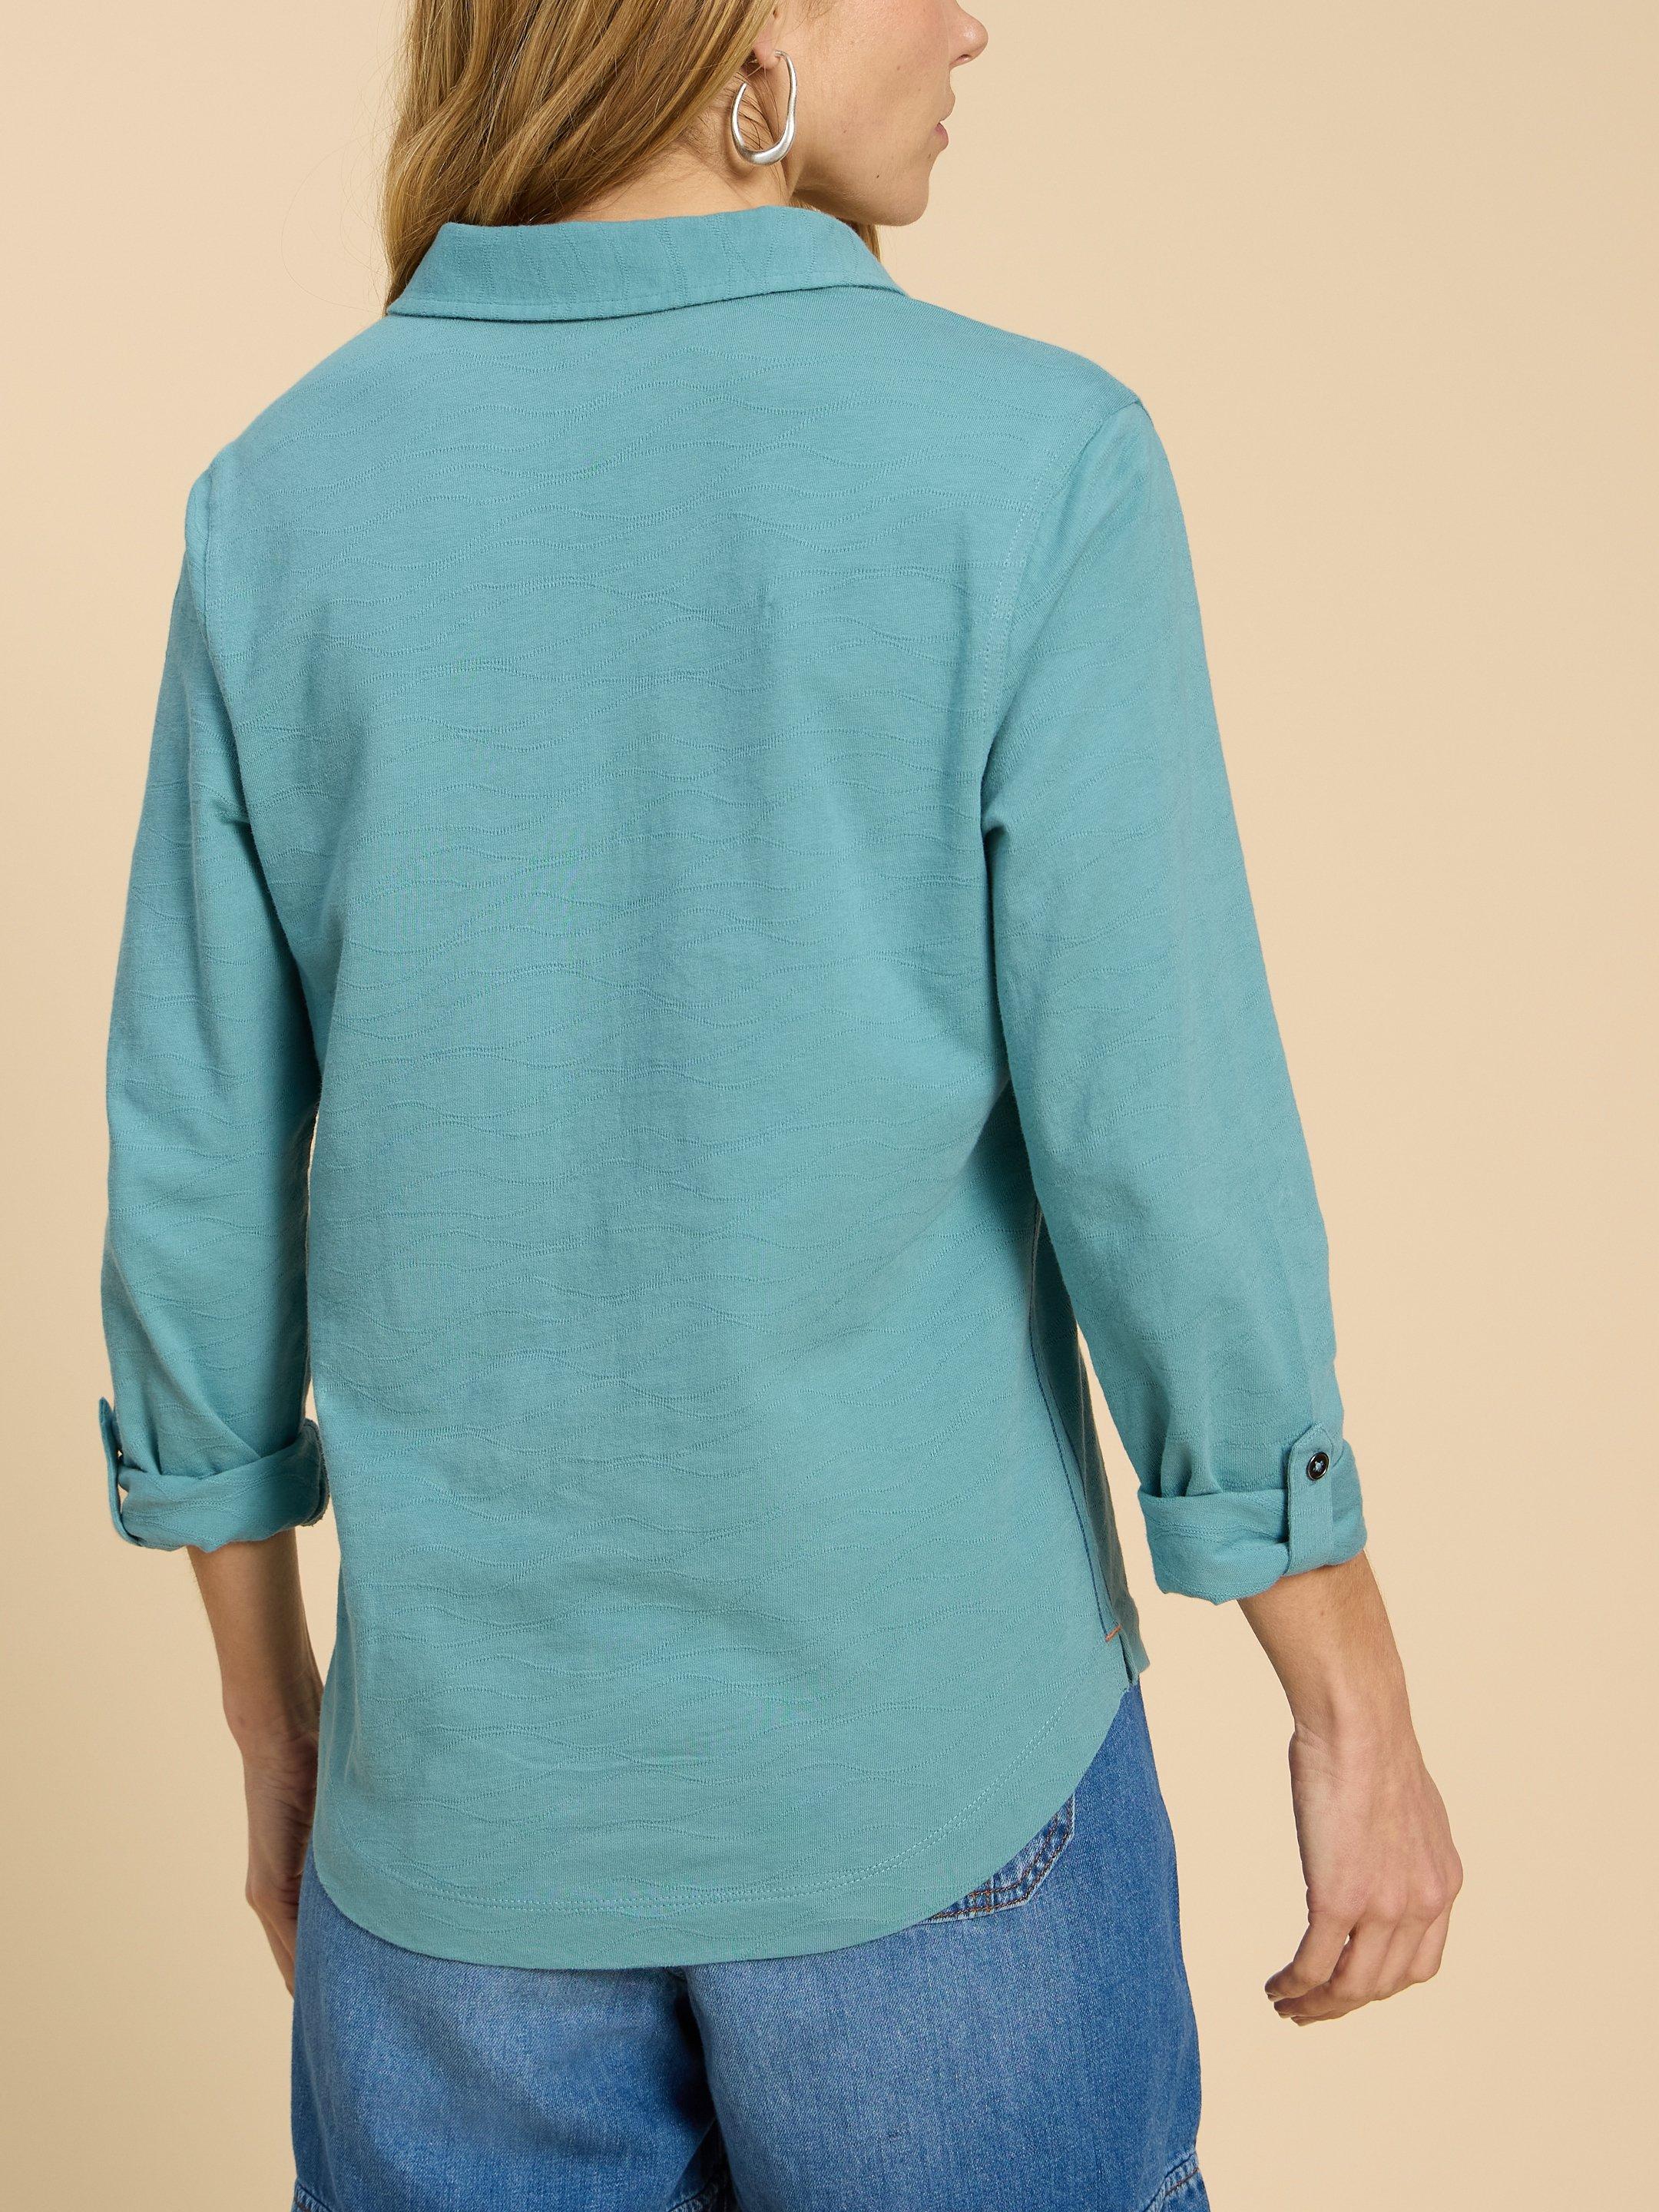 TEXTURED ANNIE in MID TEAL - MODEL BACK